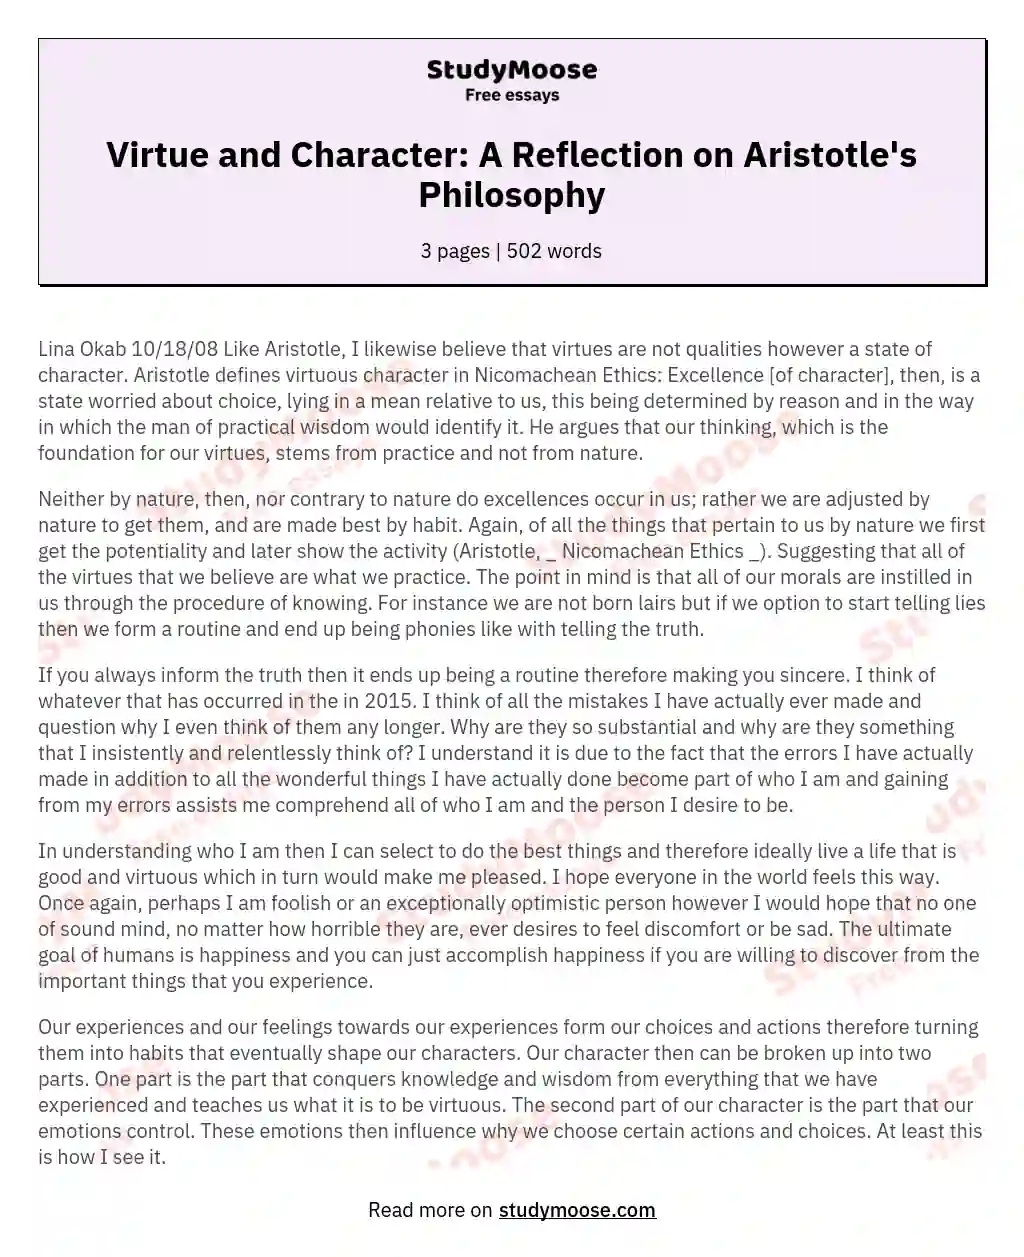 Virtue and Character: A Reflection on Aristotle's Philosophy essay